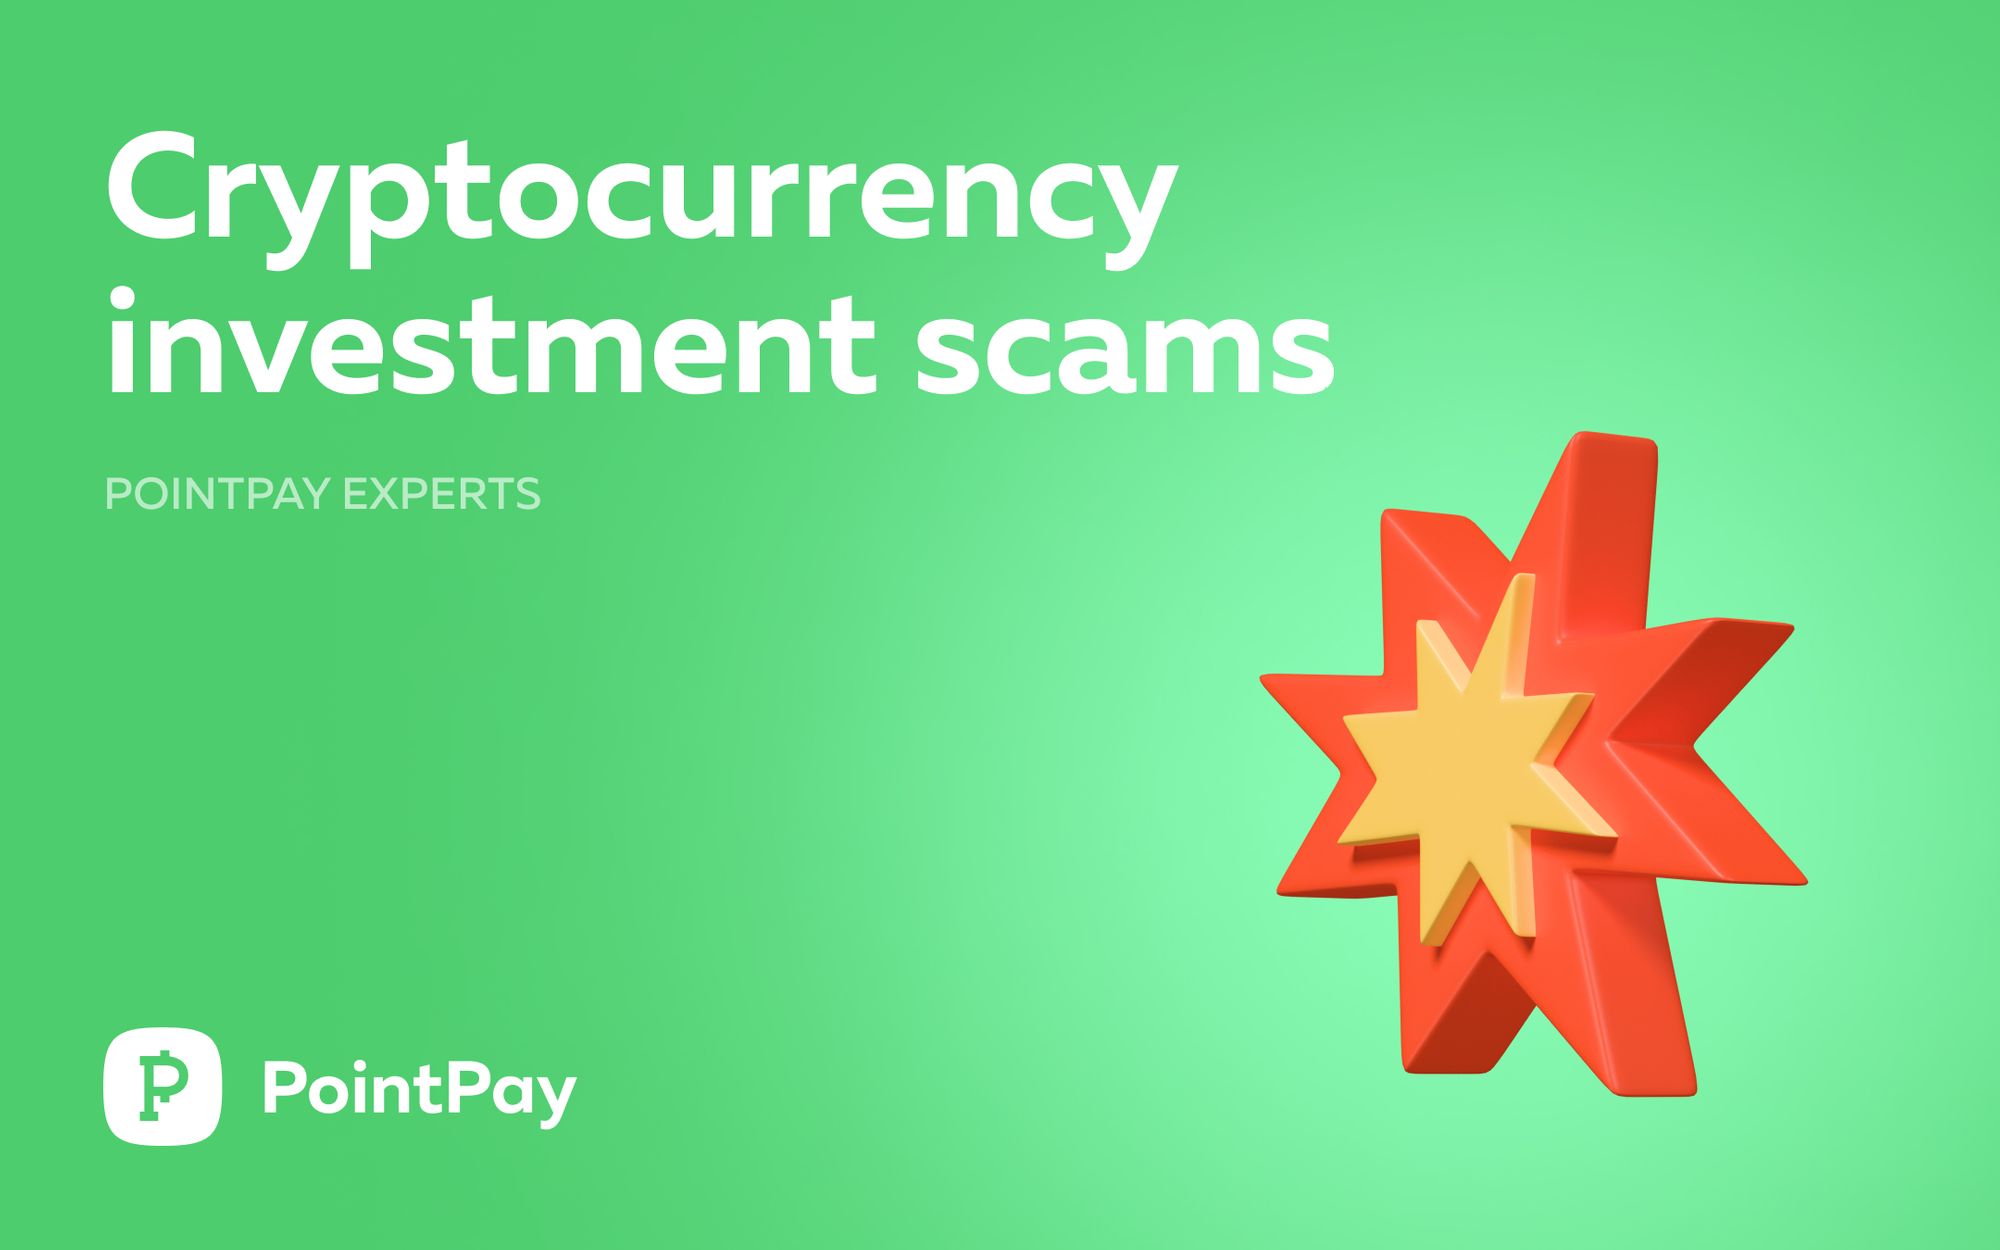 Cryptocurrency Investment Scams. Avoid Them With PointPay Experts